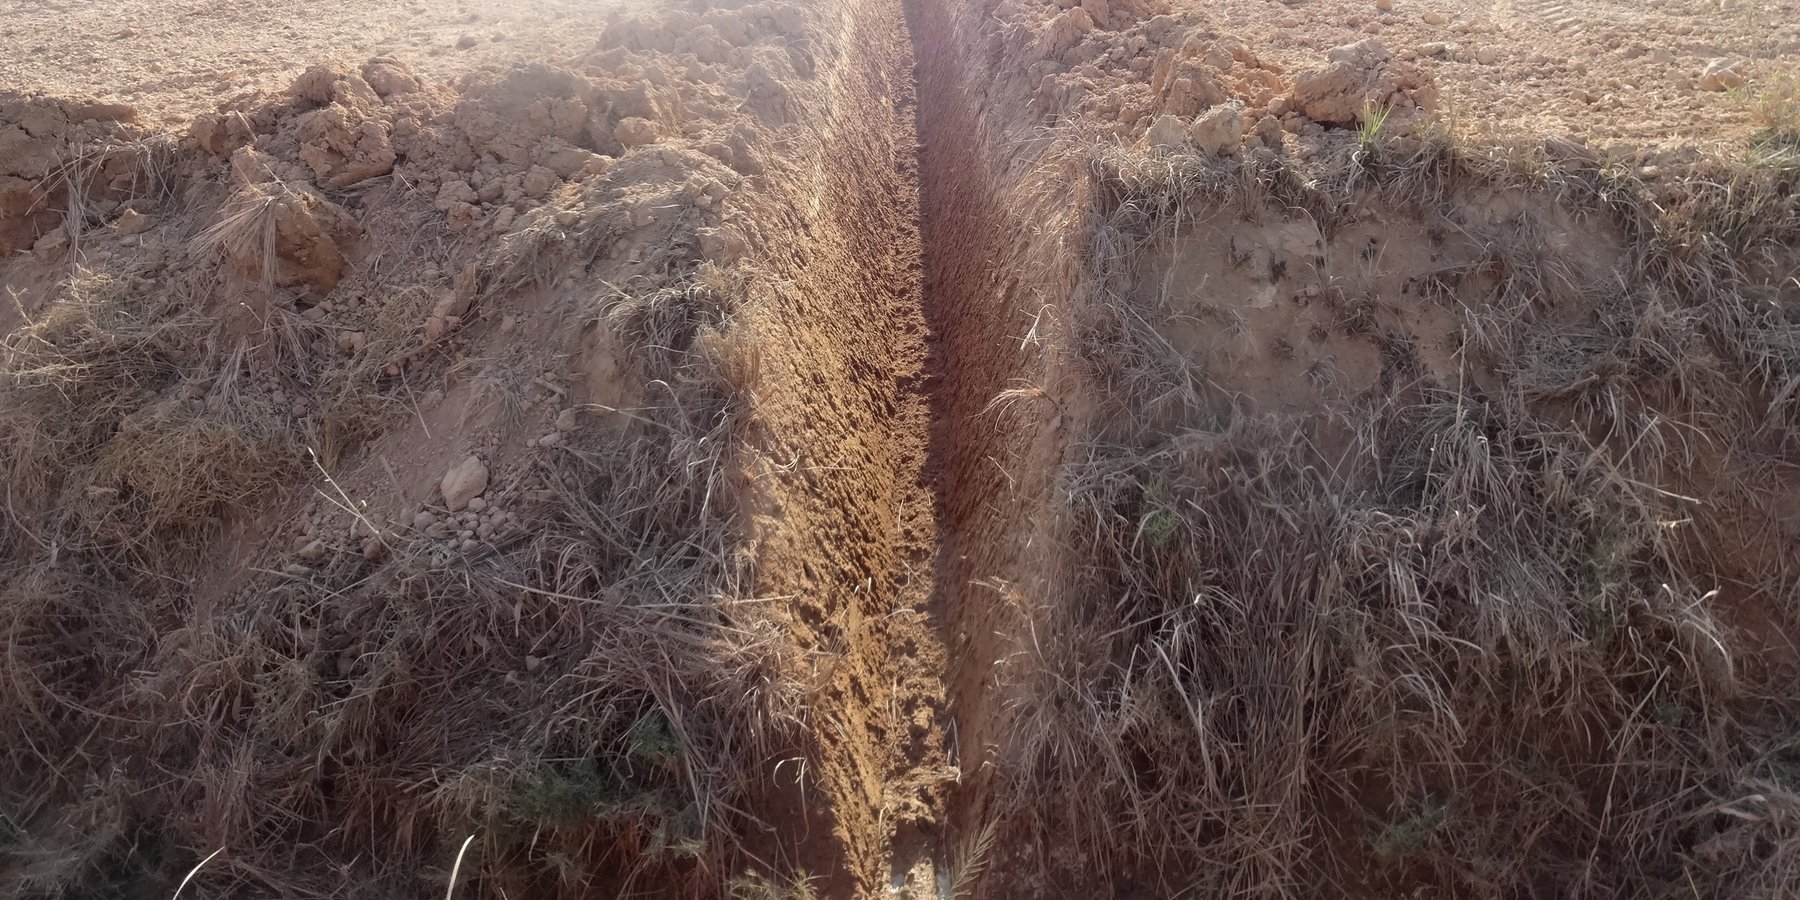 Drainage ditch constructed in a field with a problem of drainage and high calcium carbonate content.